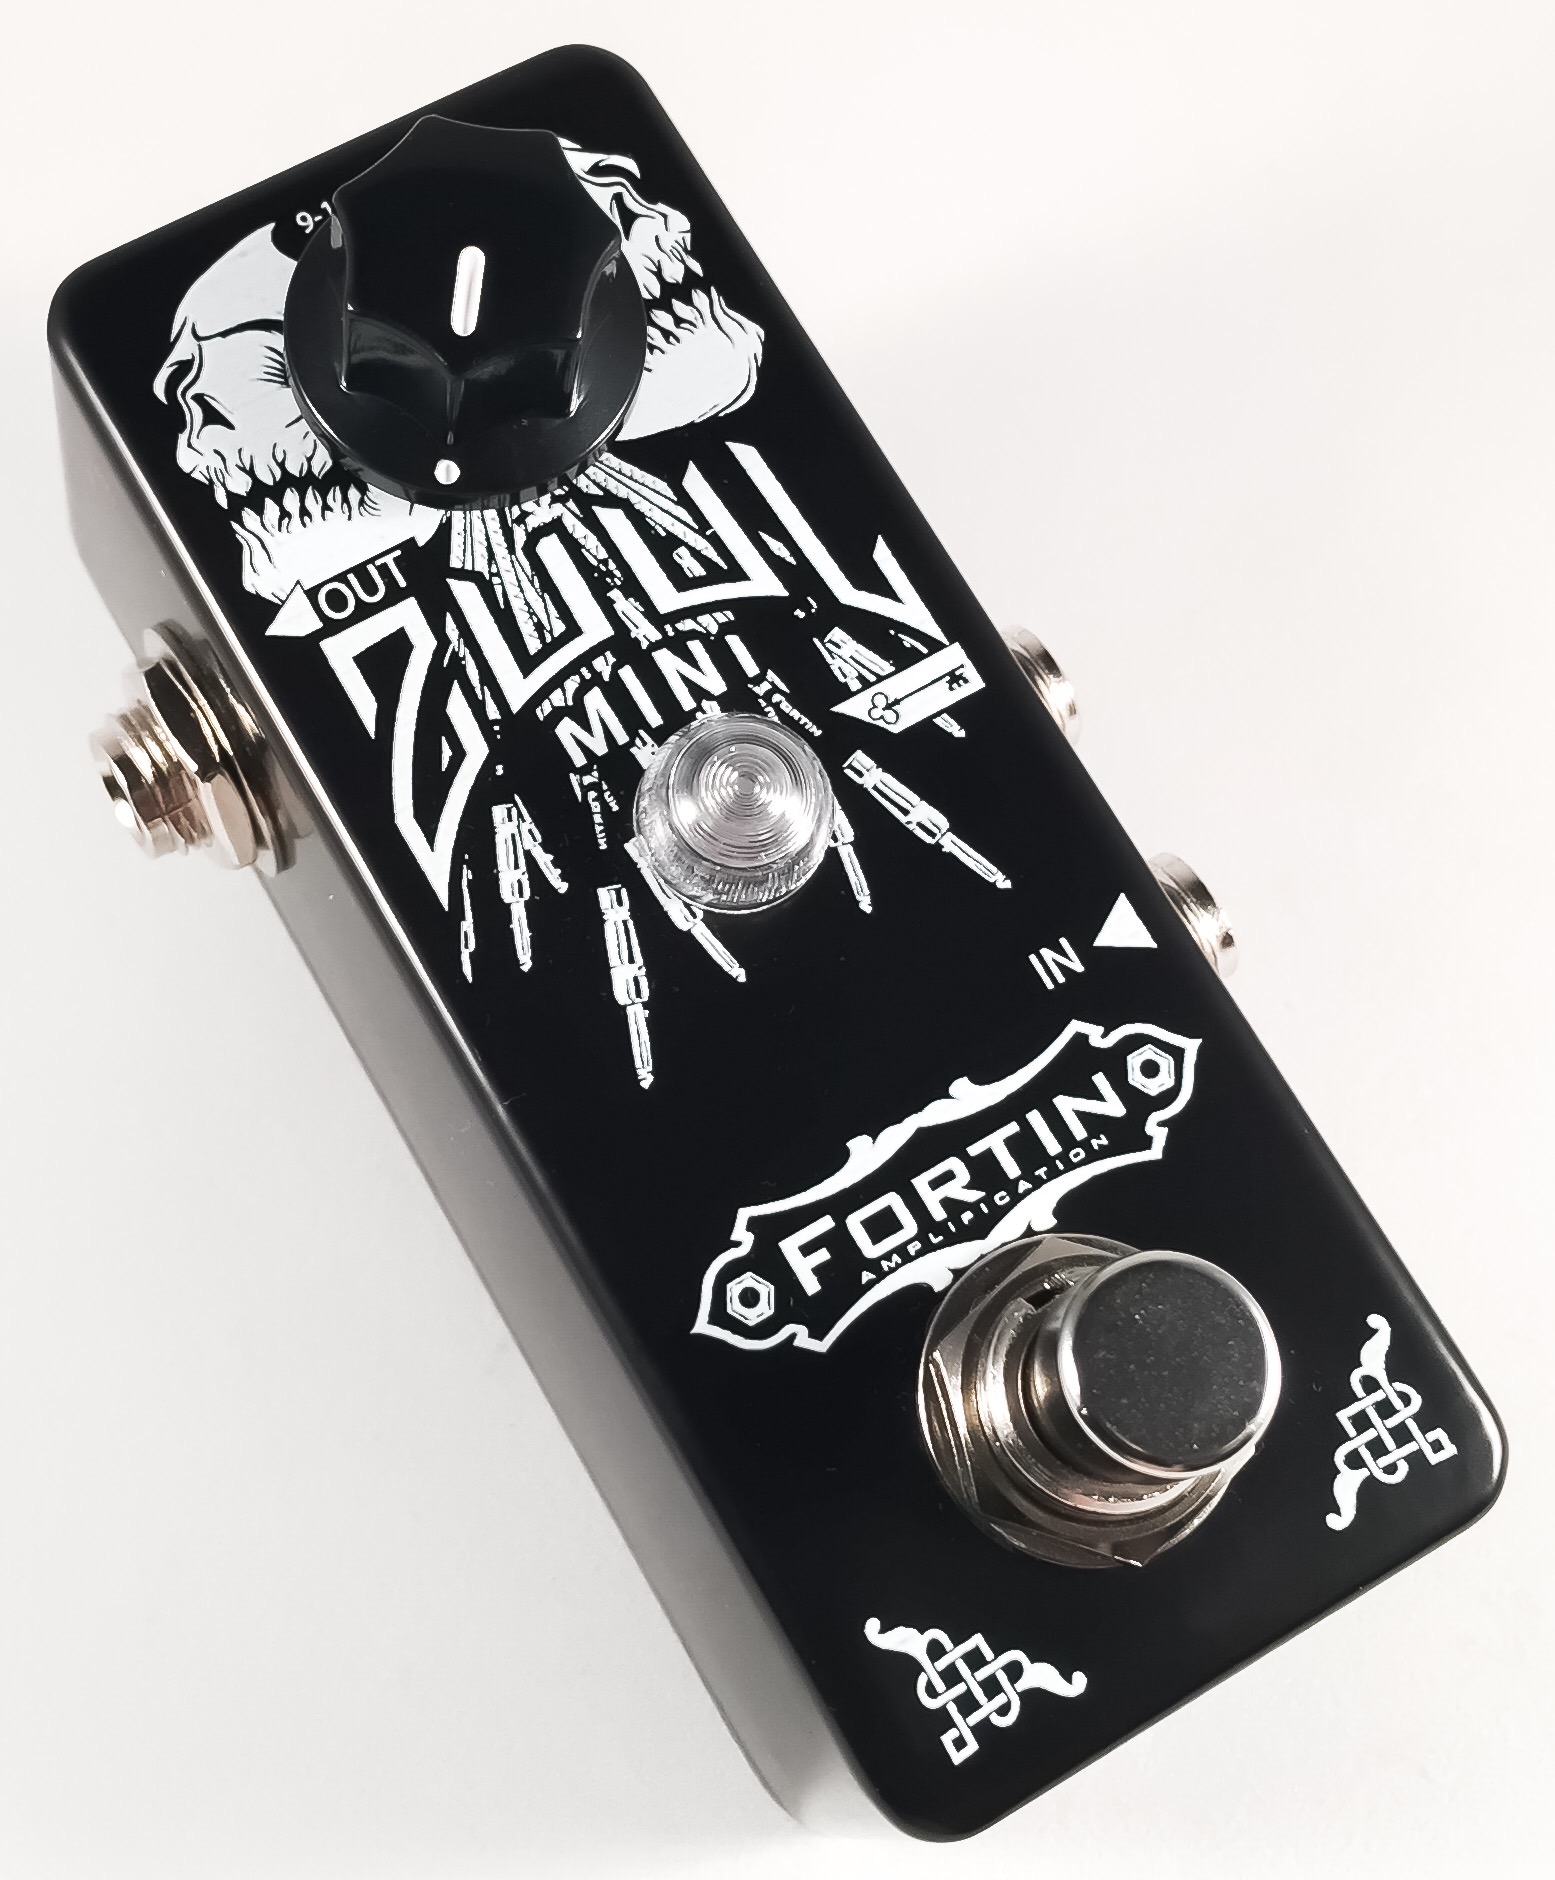 Fortin Amps Mini Zuul Noise Gate - Compressor/sustain/noise gate effect pedaal - Variation 1